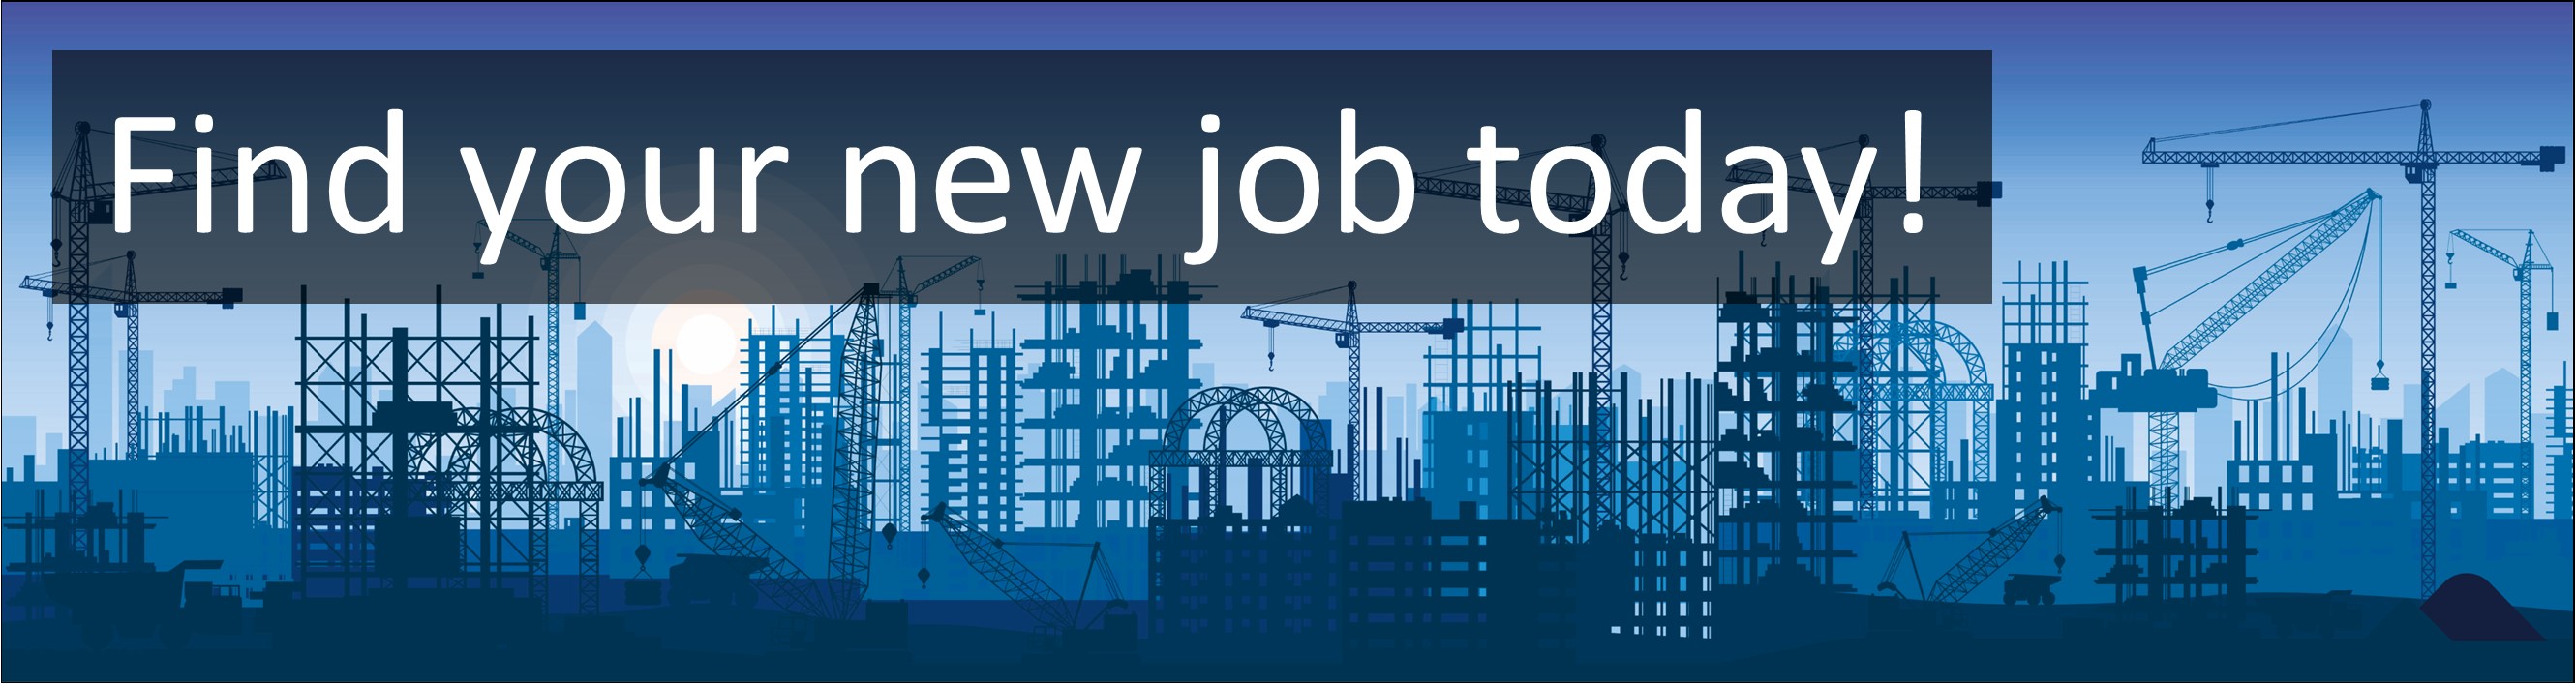 Construction & Trades Jobs. Mechanical and/or Electrical Engineer. Jobs, Careers & Vacancies in Plymouth, Devon, South West England. Advertised by AWD online – Multi-Job Board Advertising and CV Sourcing Recruitment Services